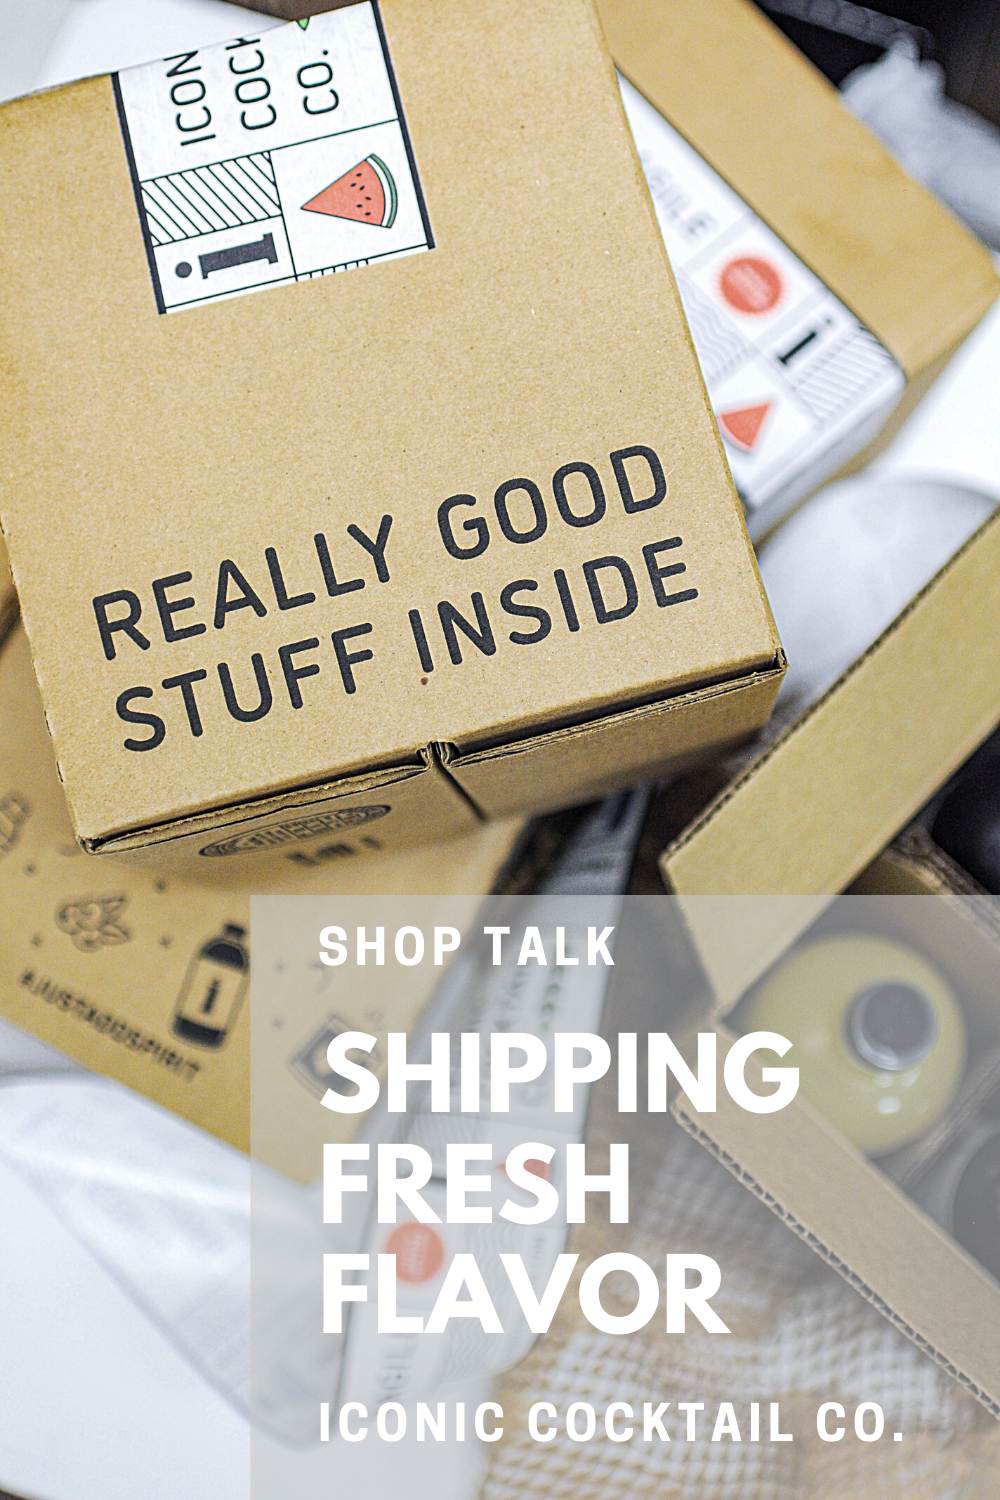 Let’s Talk Shop: Shipping the Freshest Flavors to You.